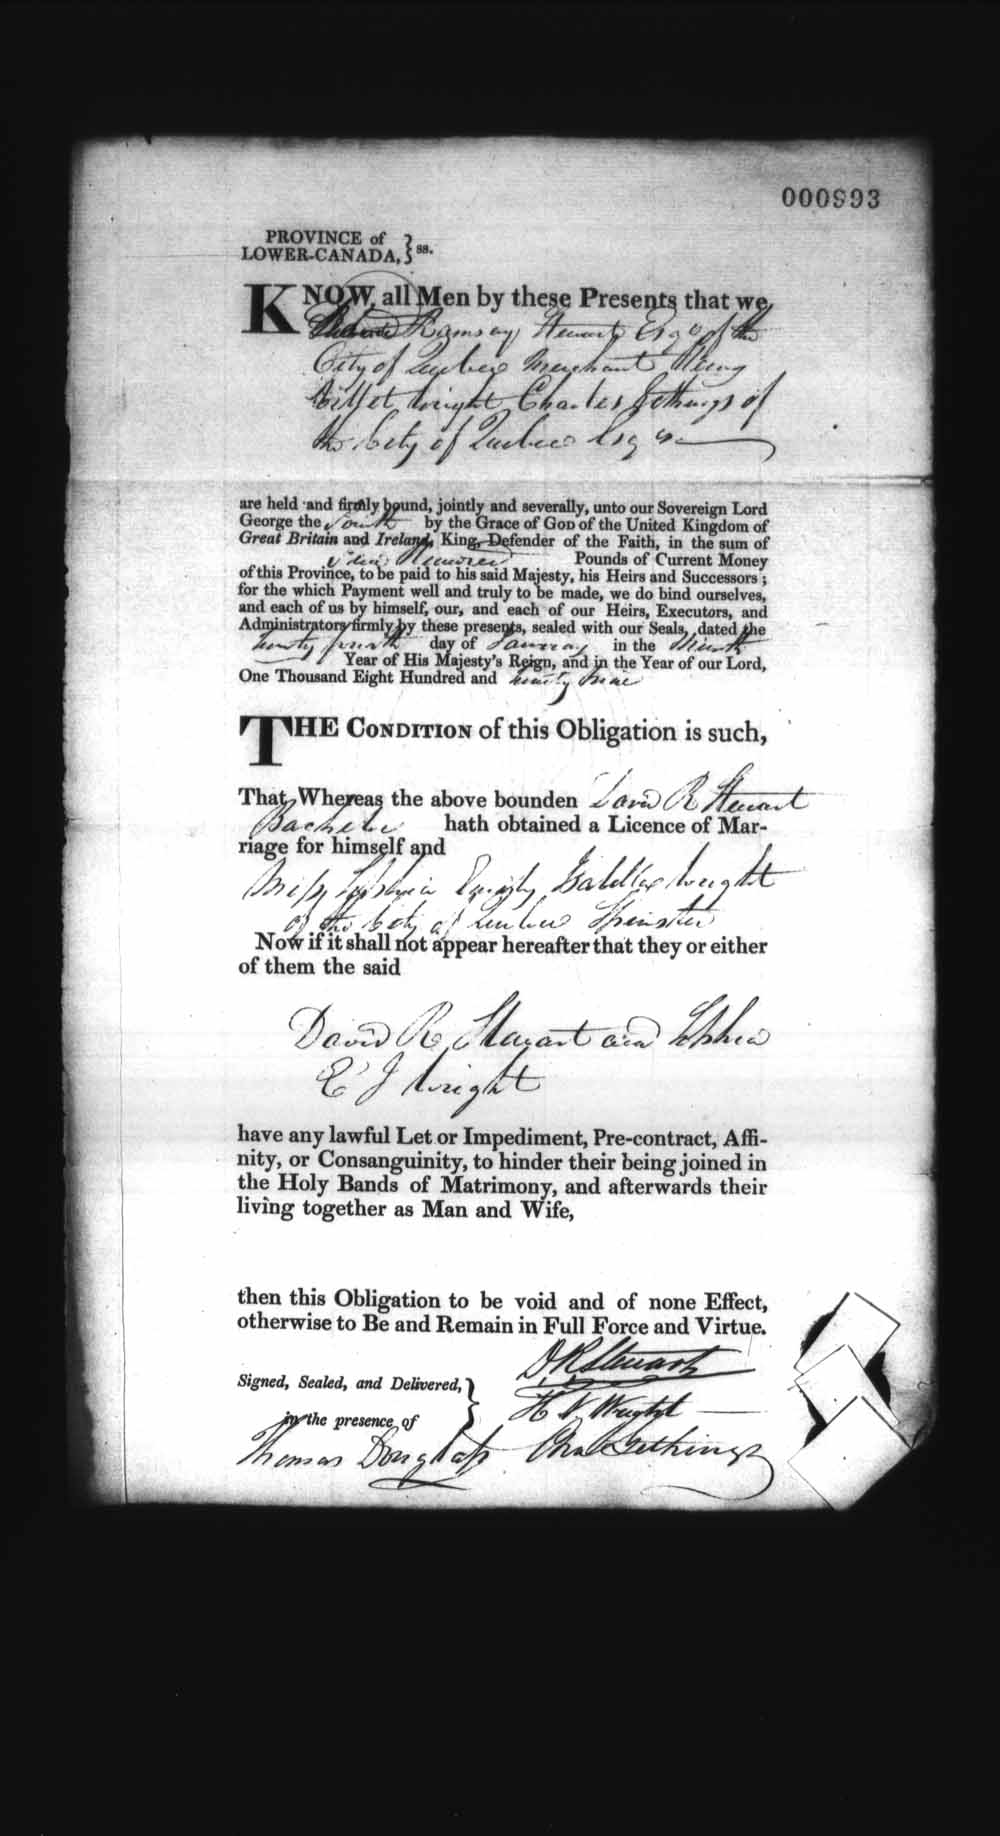 Digitized page of Upper and Lower Canada Marriage Bonds (1779-1865) for Image No.: e008237108